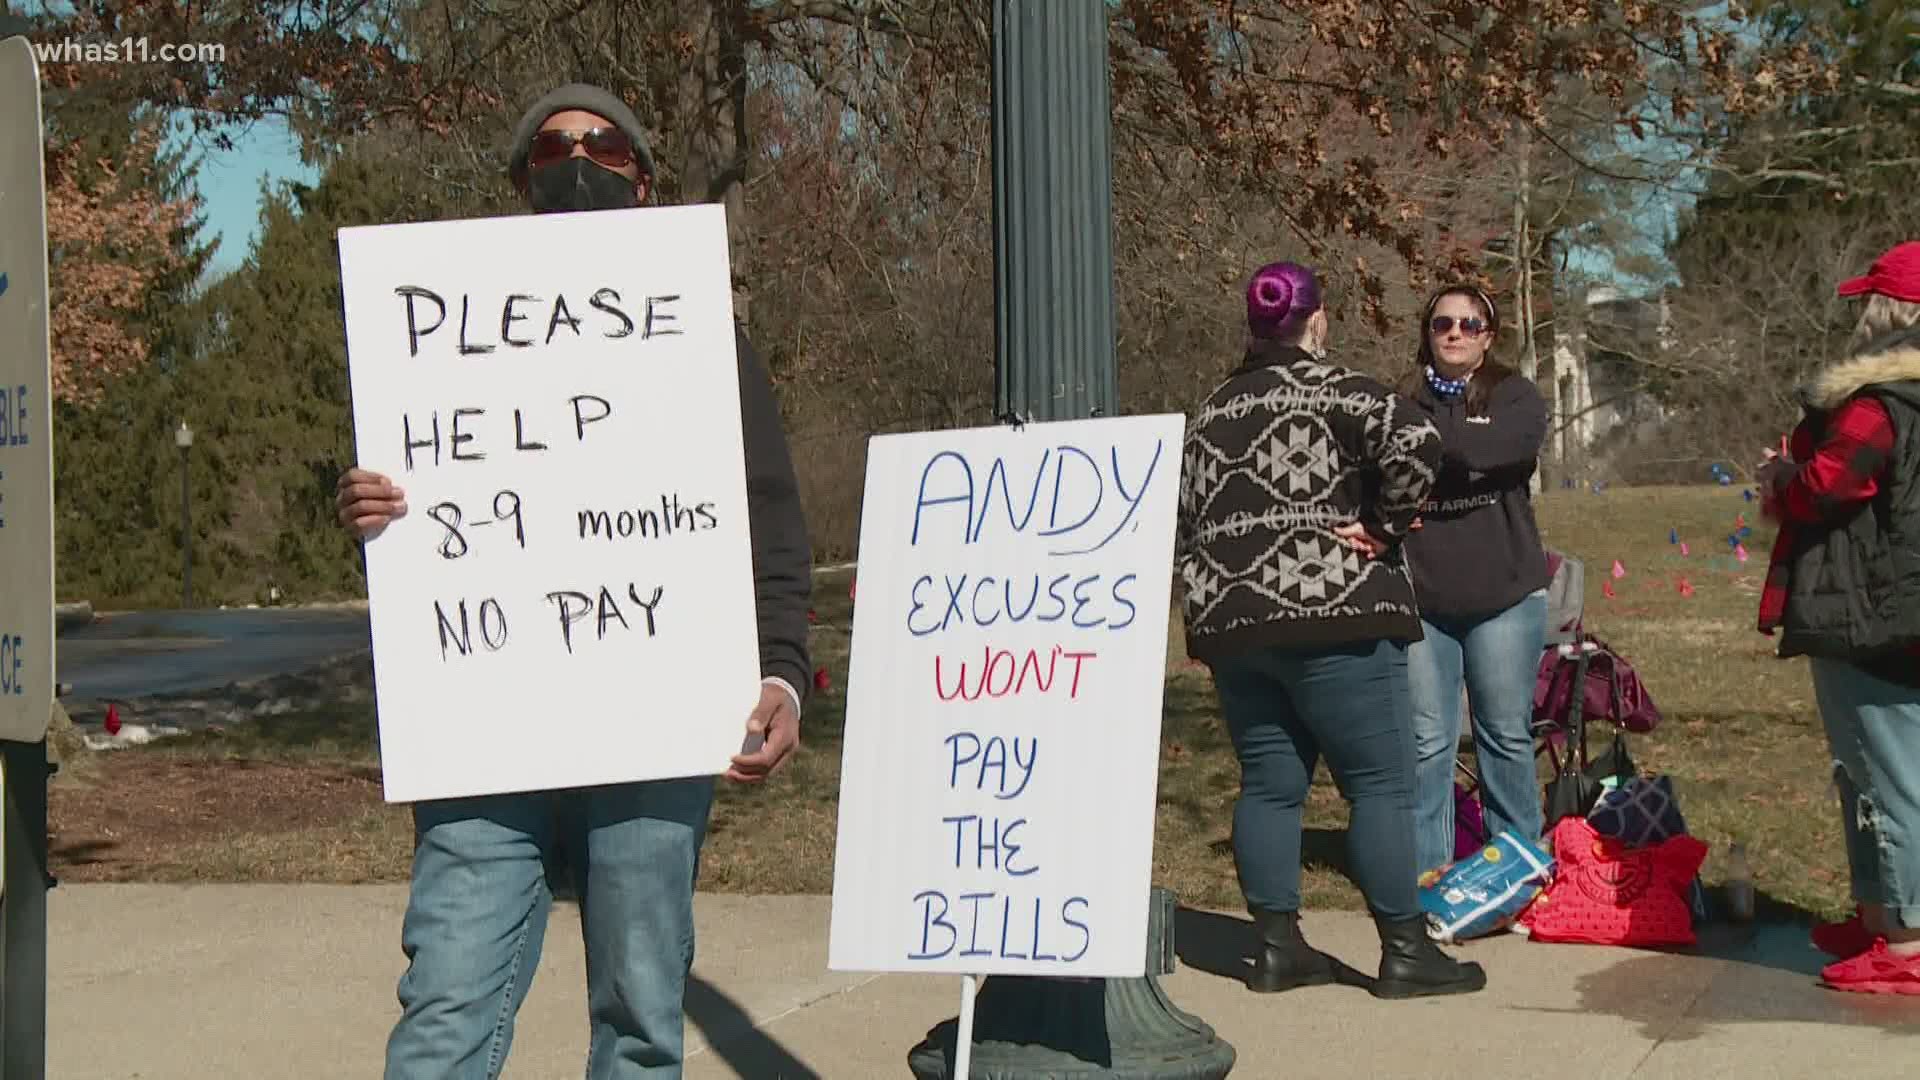 Unemployed Kentuckians want the system fixed so they can receive benefits. Tuesday, they staged a protest and plan to spend the night outside the state Capitol.